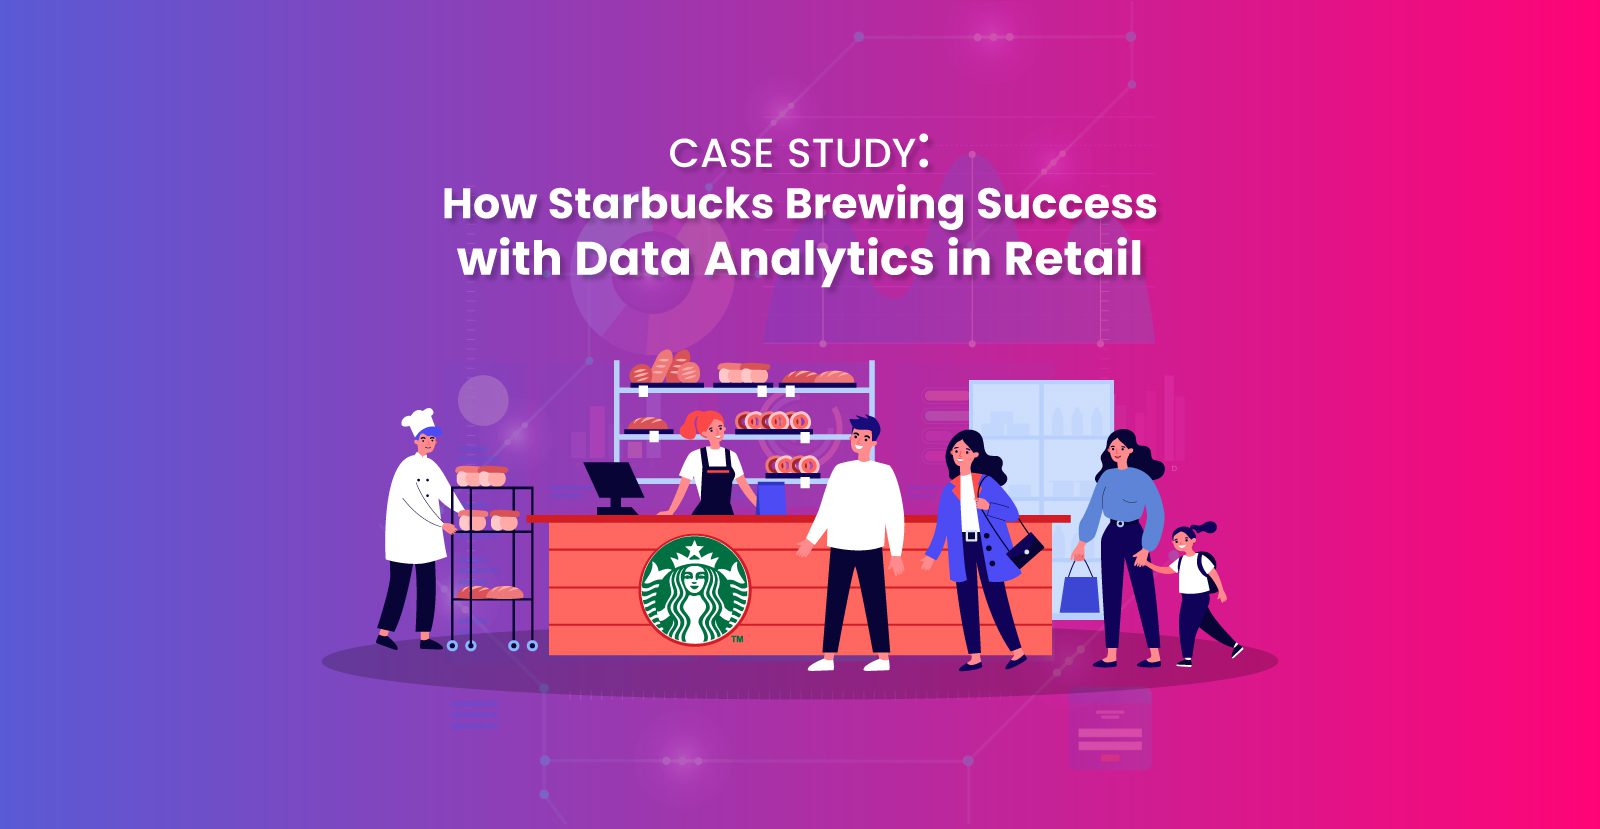 Case Study: How Starbucks Brewing Success with Data Analytics in Retail